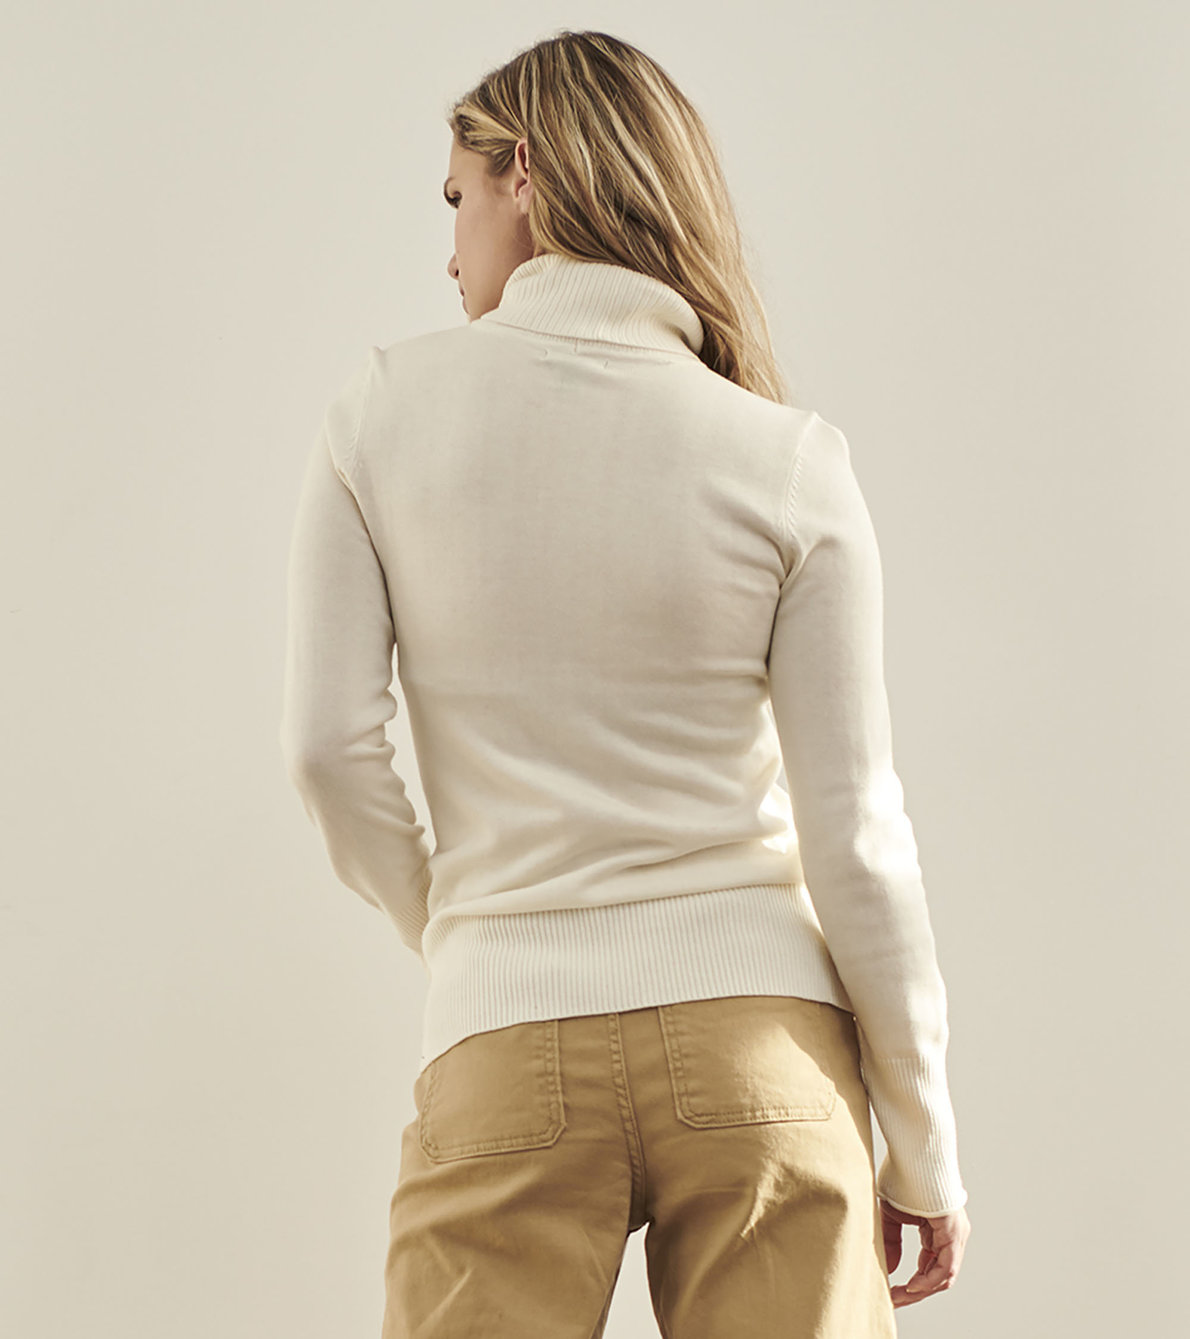 View larger image of Turtleneck Sweater - Cream